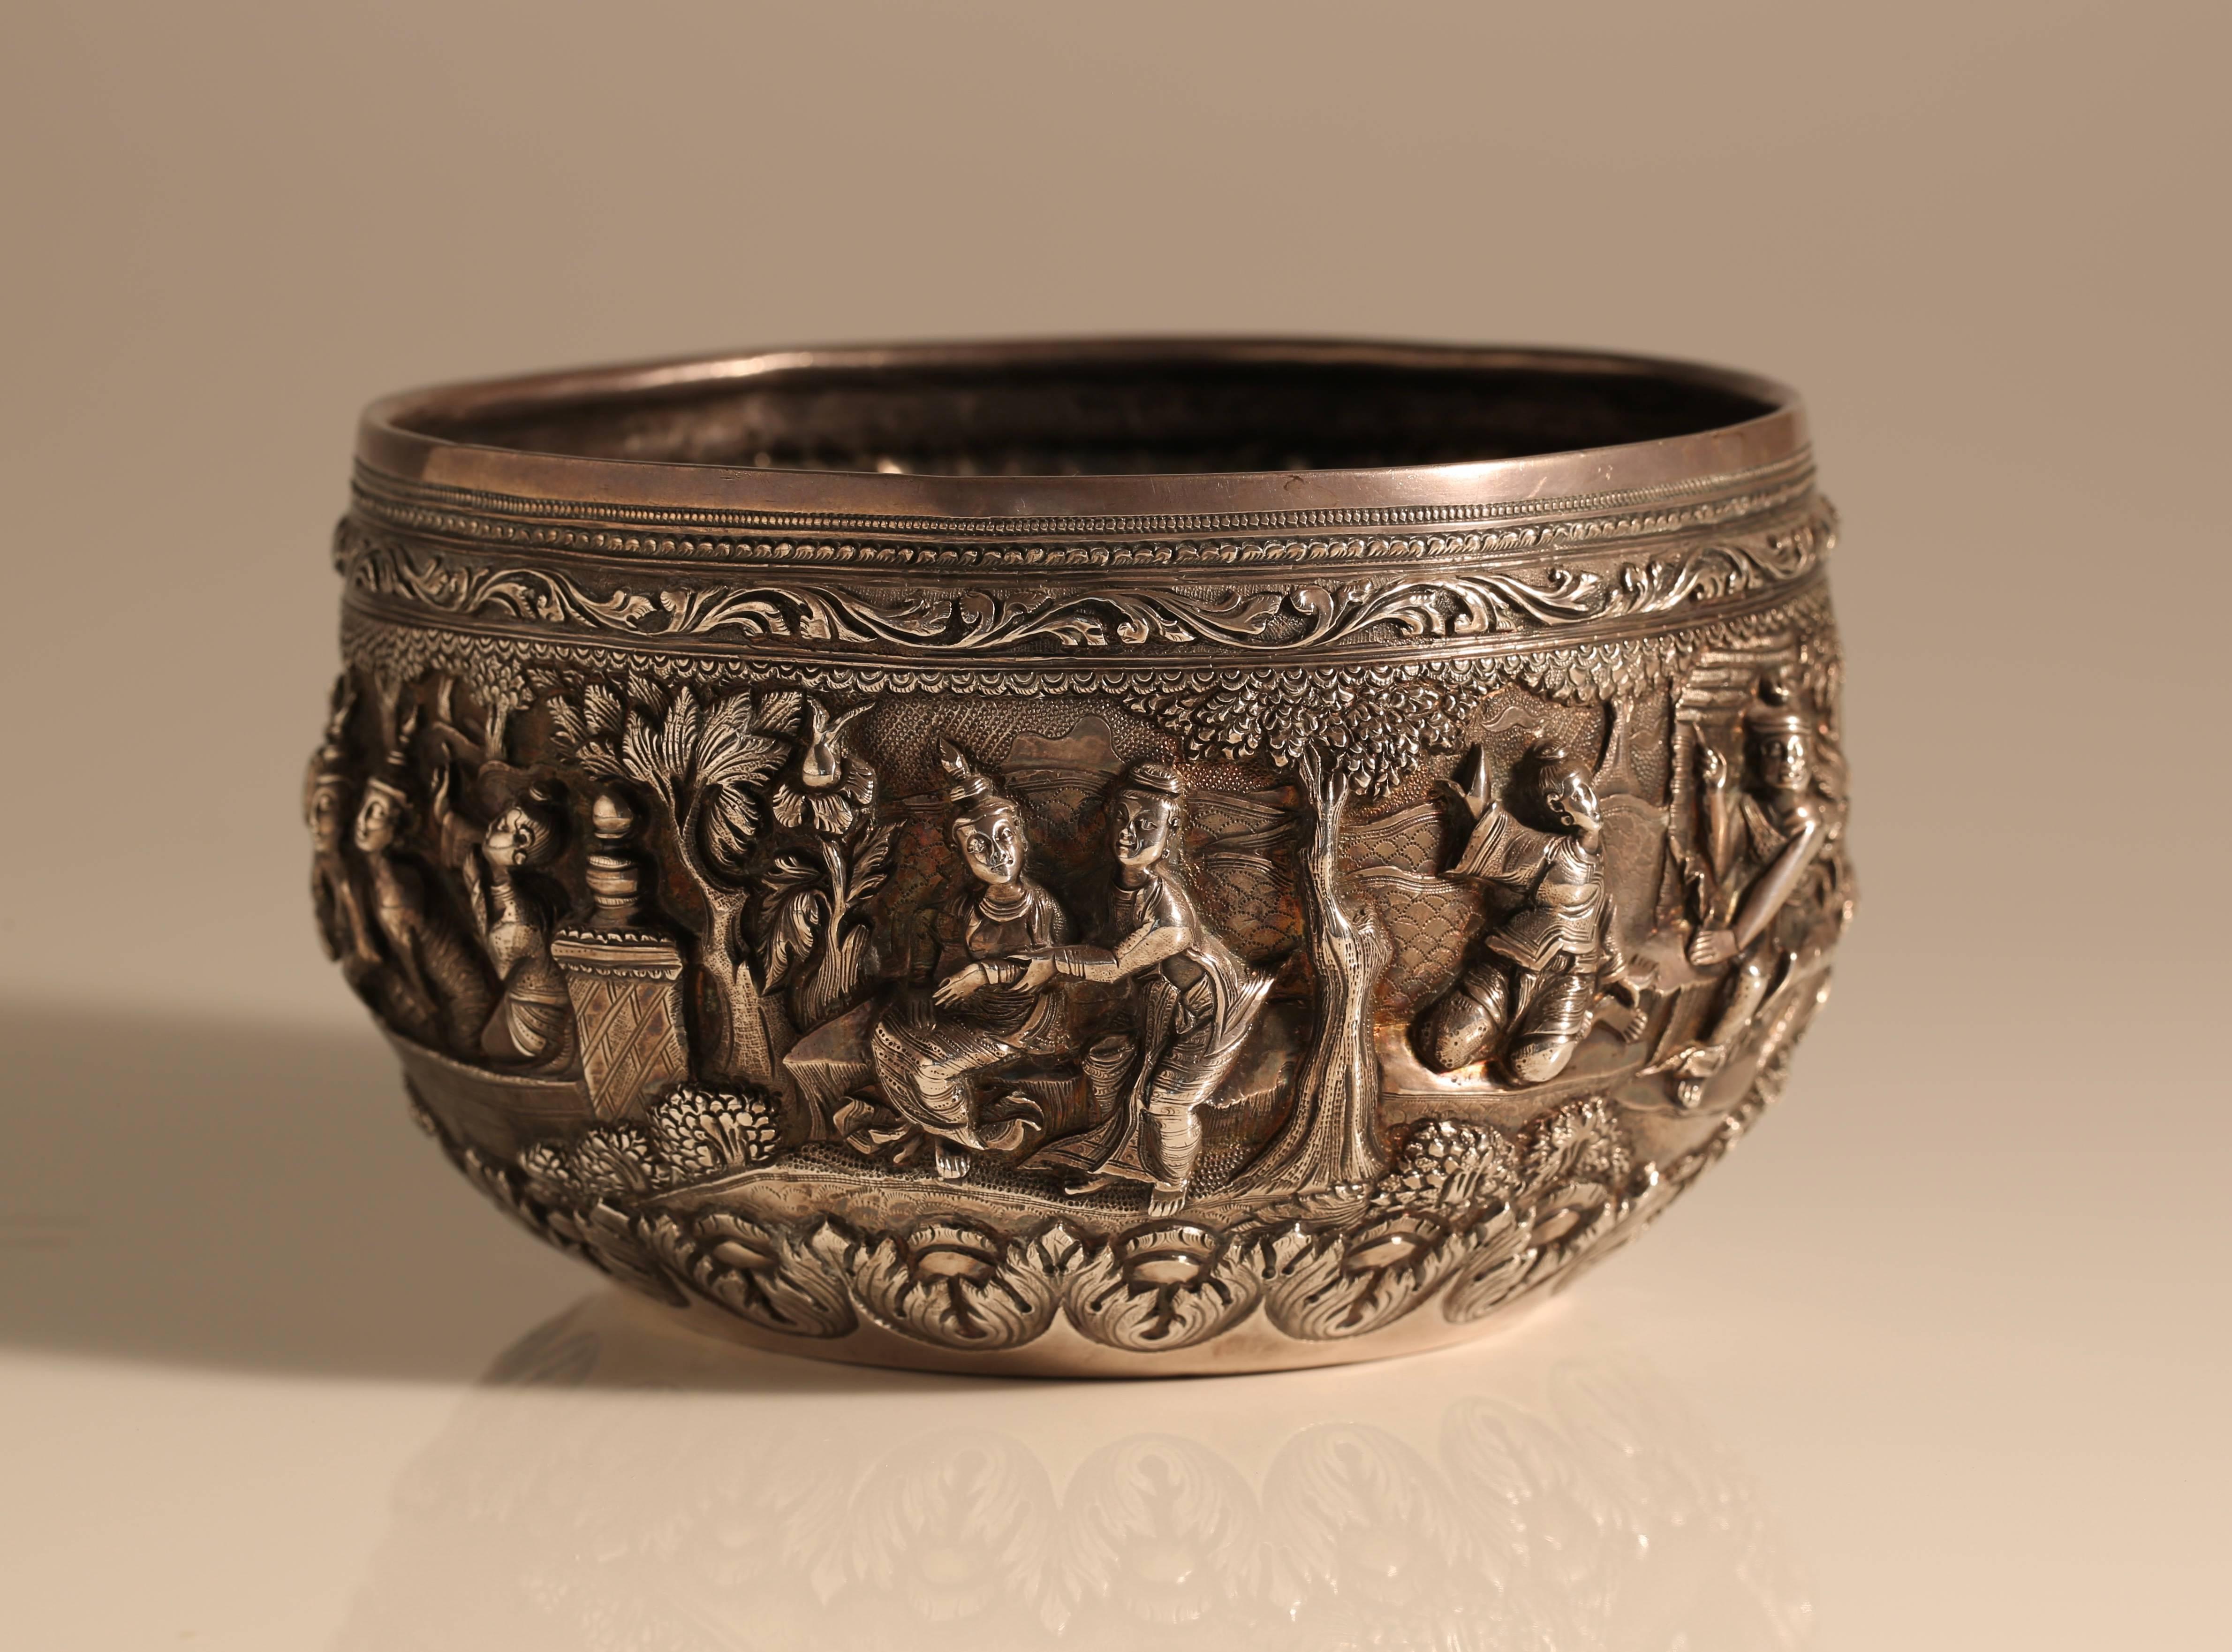 Burmese silver bowl.

A very good quality late 19th or early 20th century Burmese silver bowl decorated with repouse and engraved decoration, circa 1900
Measures:
13.5 cm diameter

8 cm high.